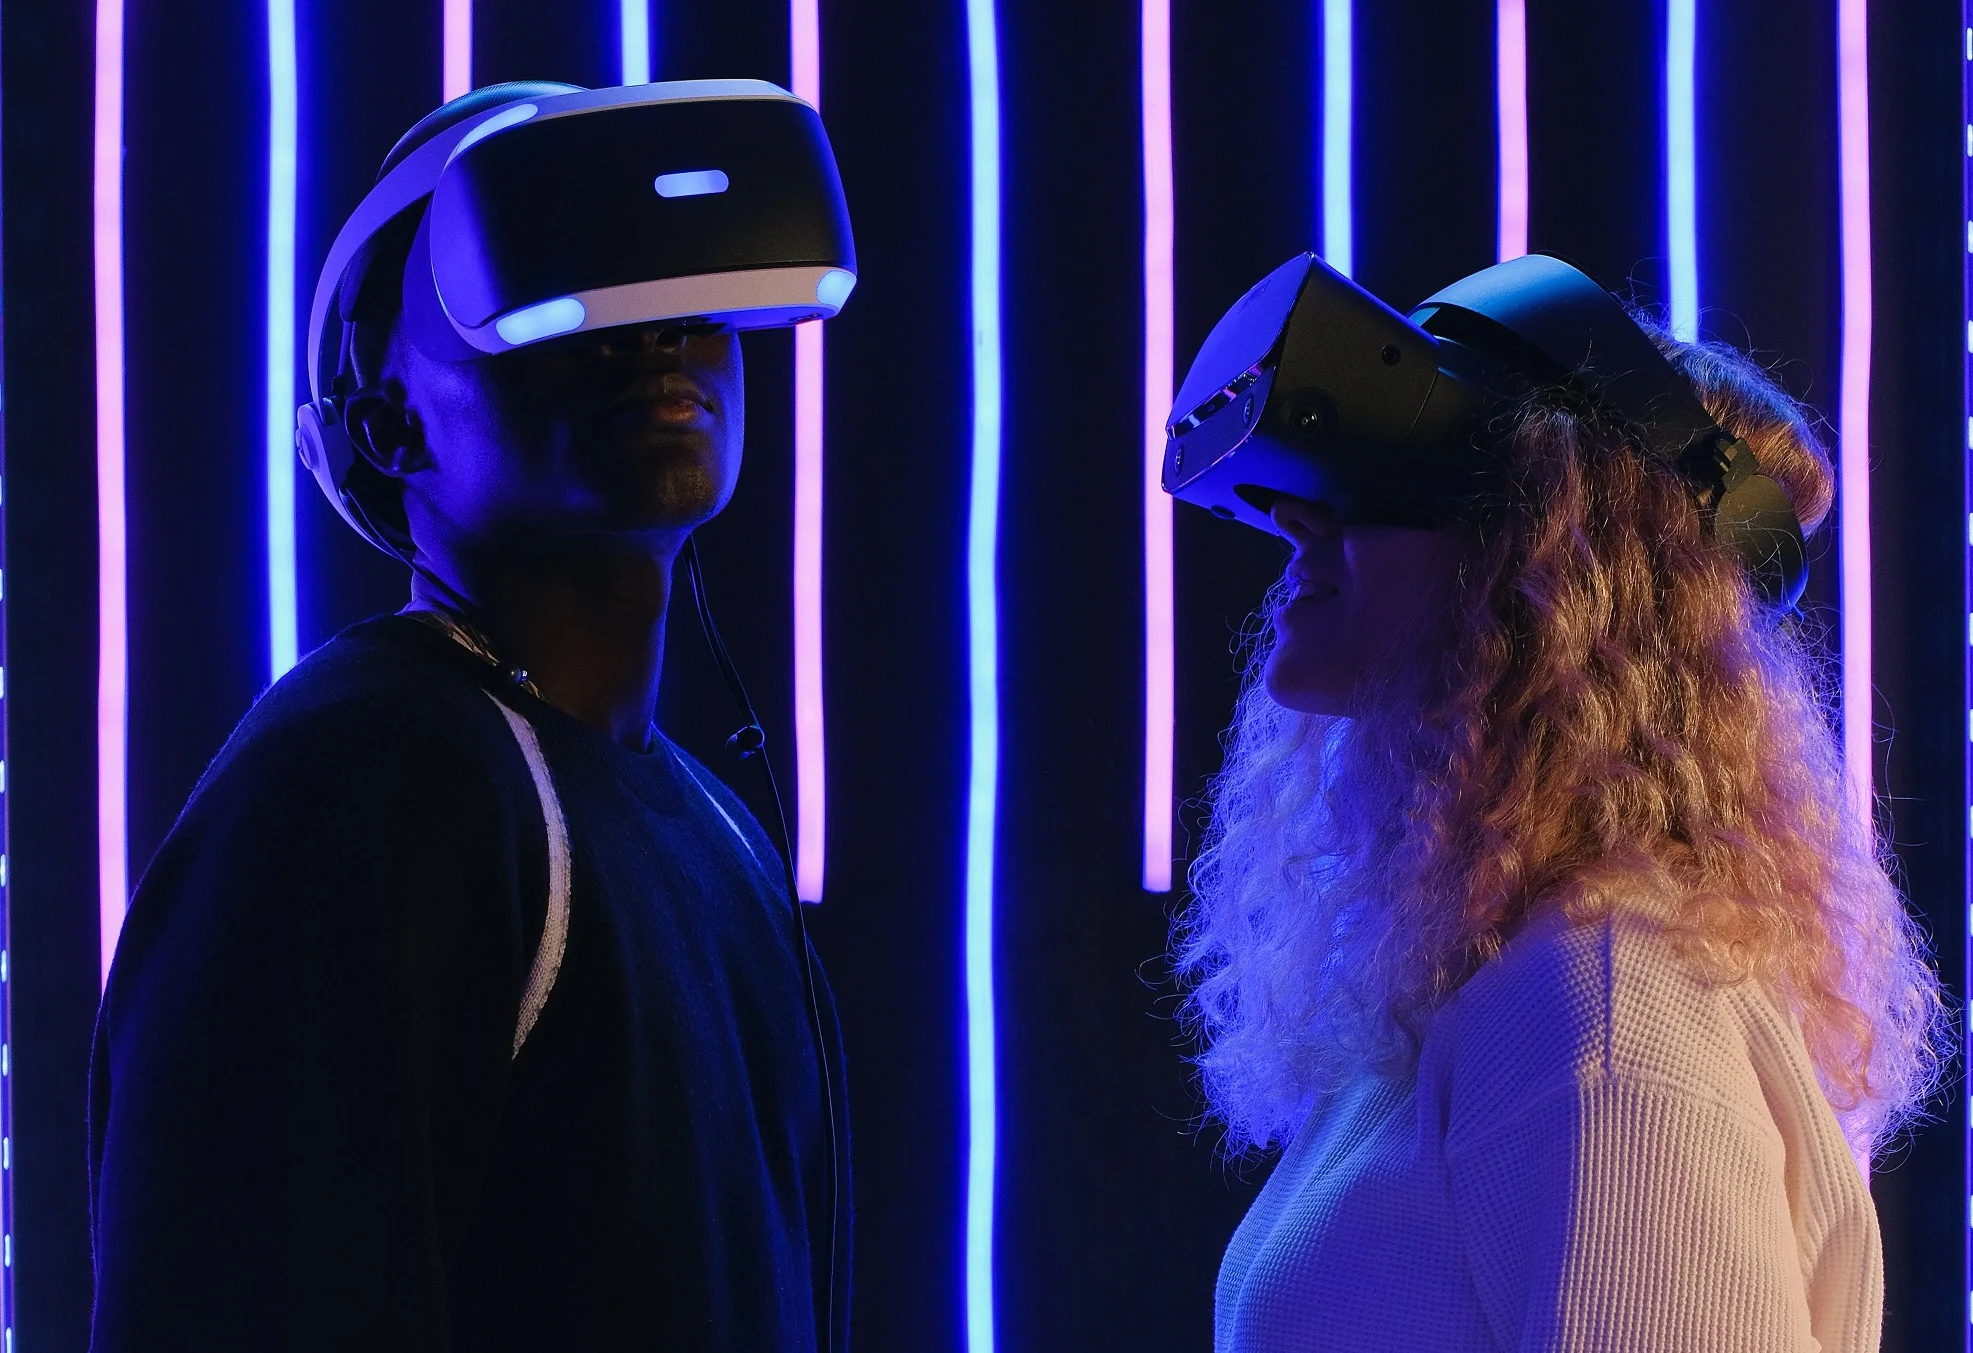 Two people standing next to neon night lights wearing VR goggles